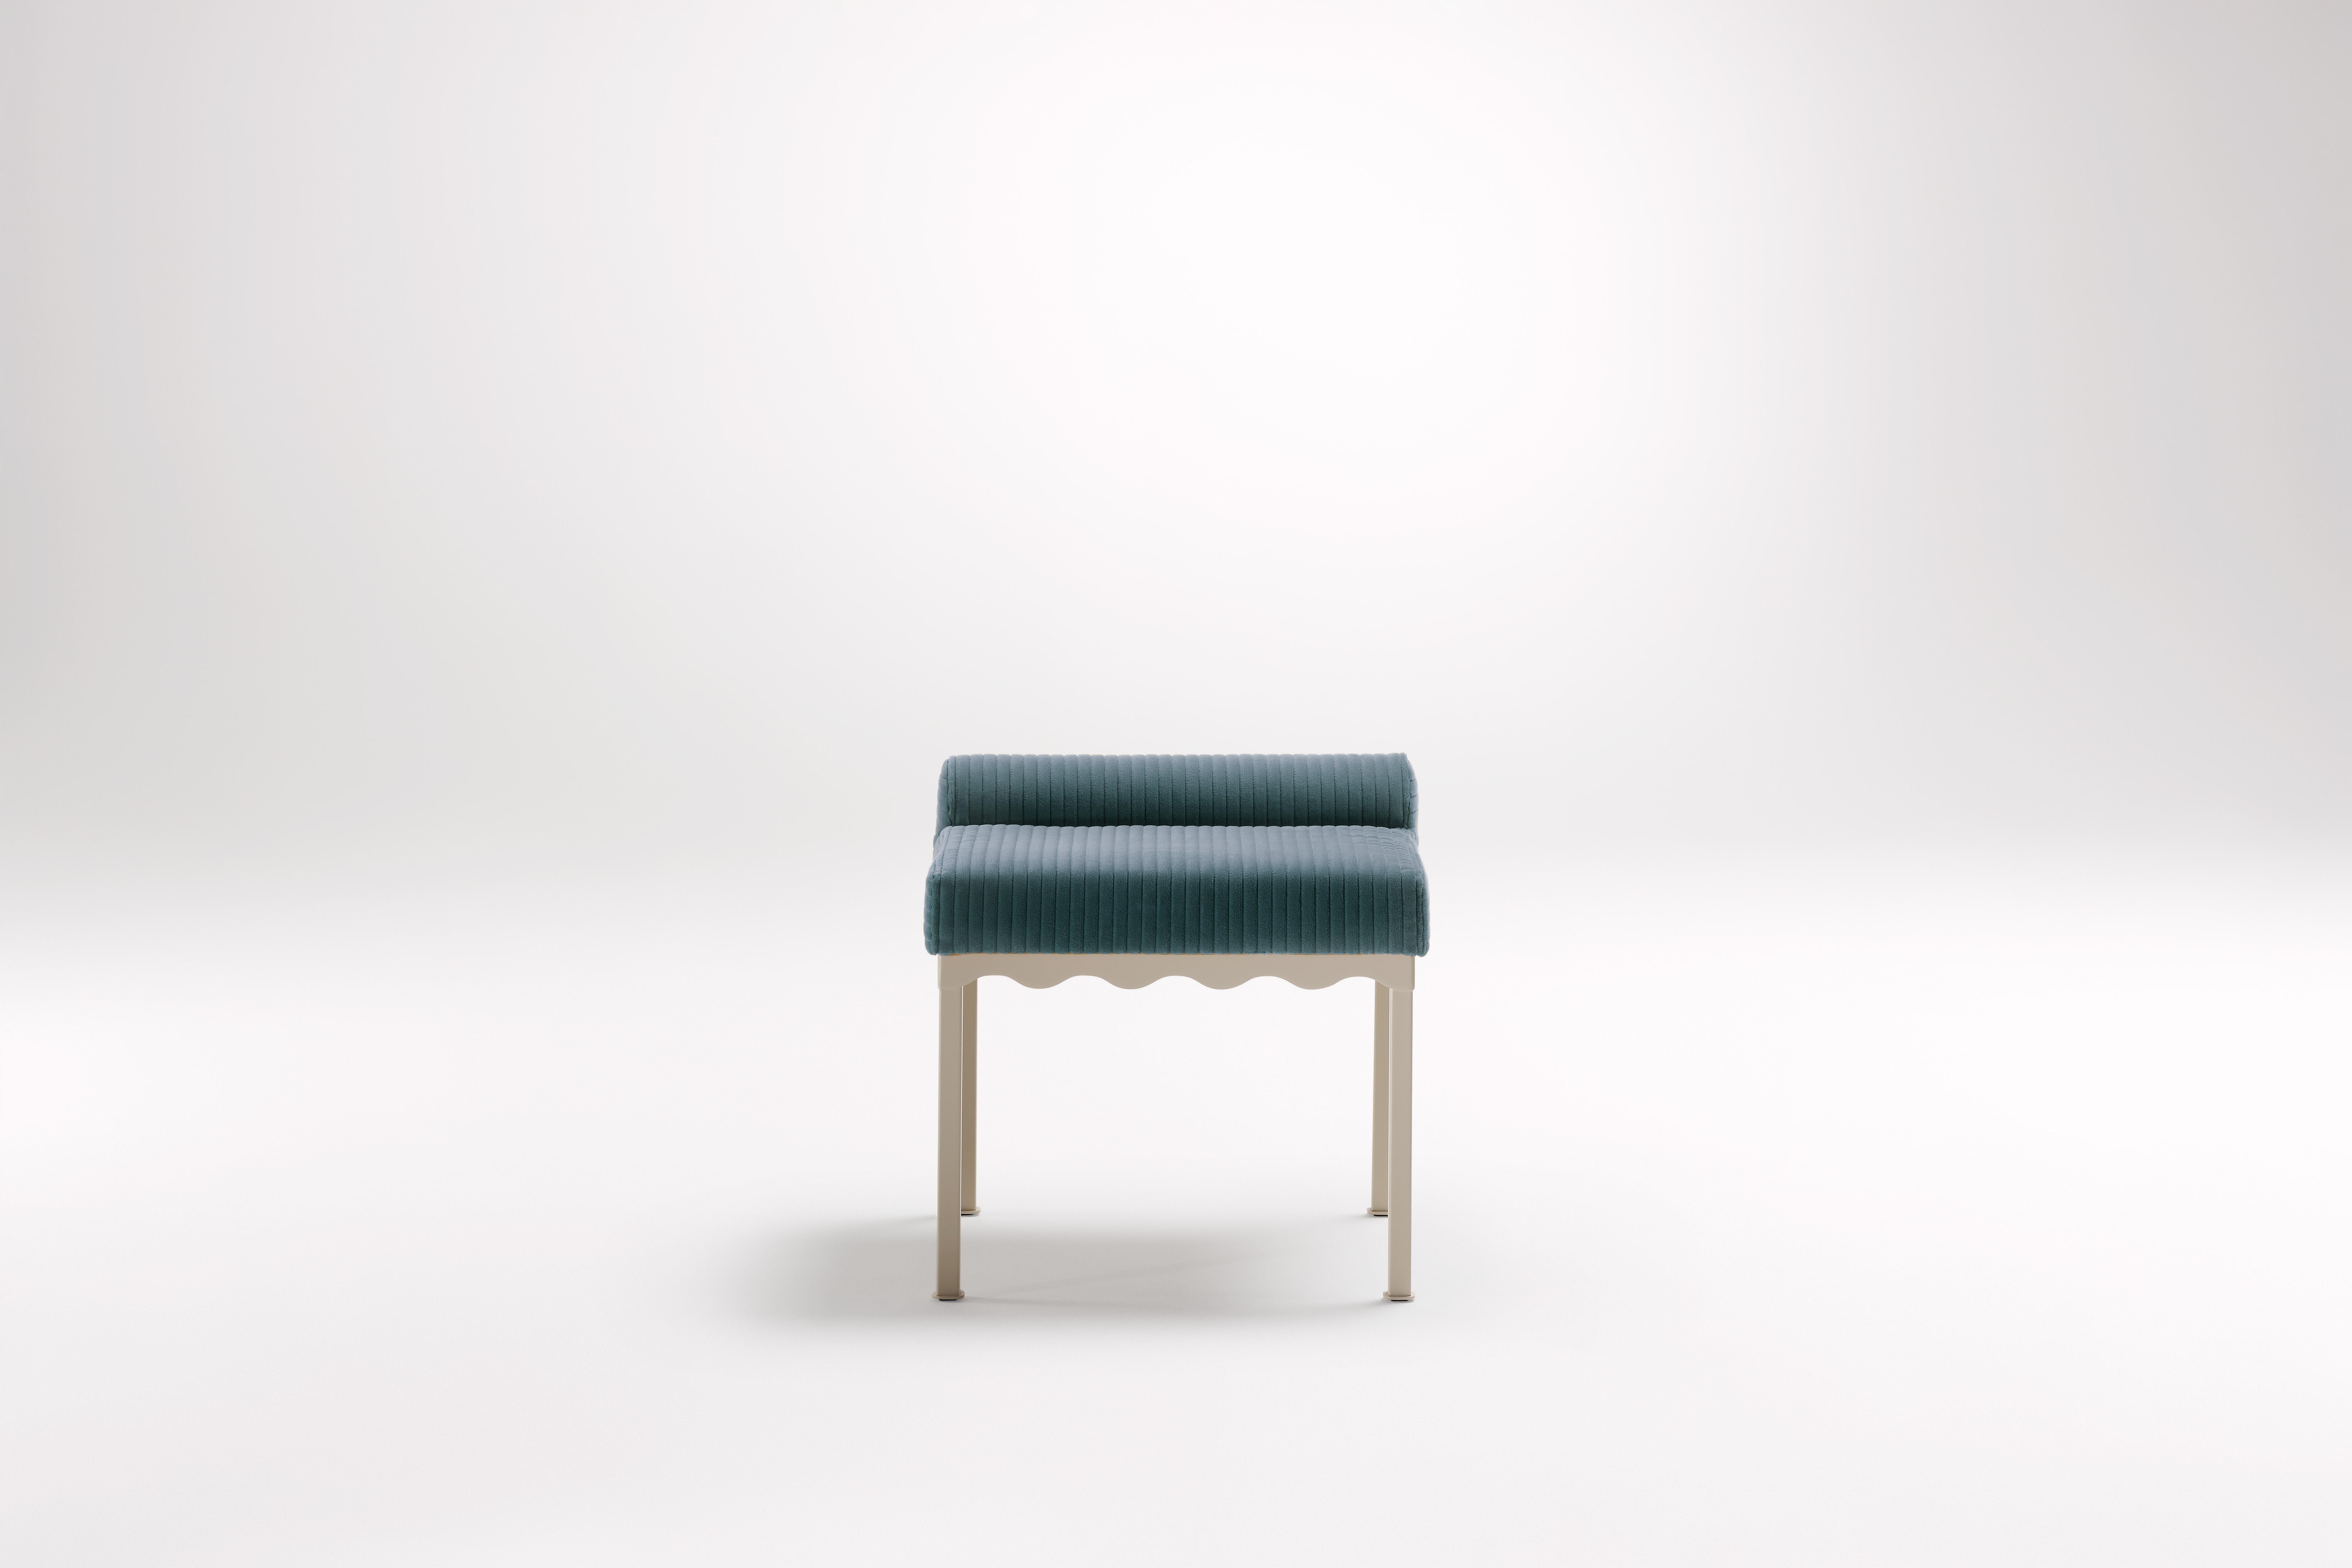 Oracle Bellini 540 Bench by Coco Flip
Dimensions: D 54 x W 54 x H 52.5 cm
Materials: Timber / Upholstered tops, Powder-coated steel frame. 
Weight: 12 kg
Frame Finishes: Textura Paperbark.

Coco Flip is a Melbourne based furniture and lighting